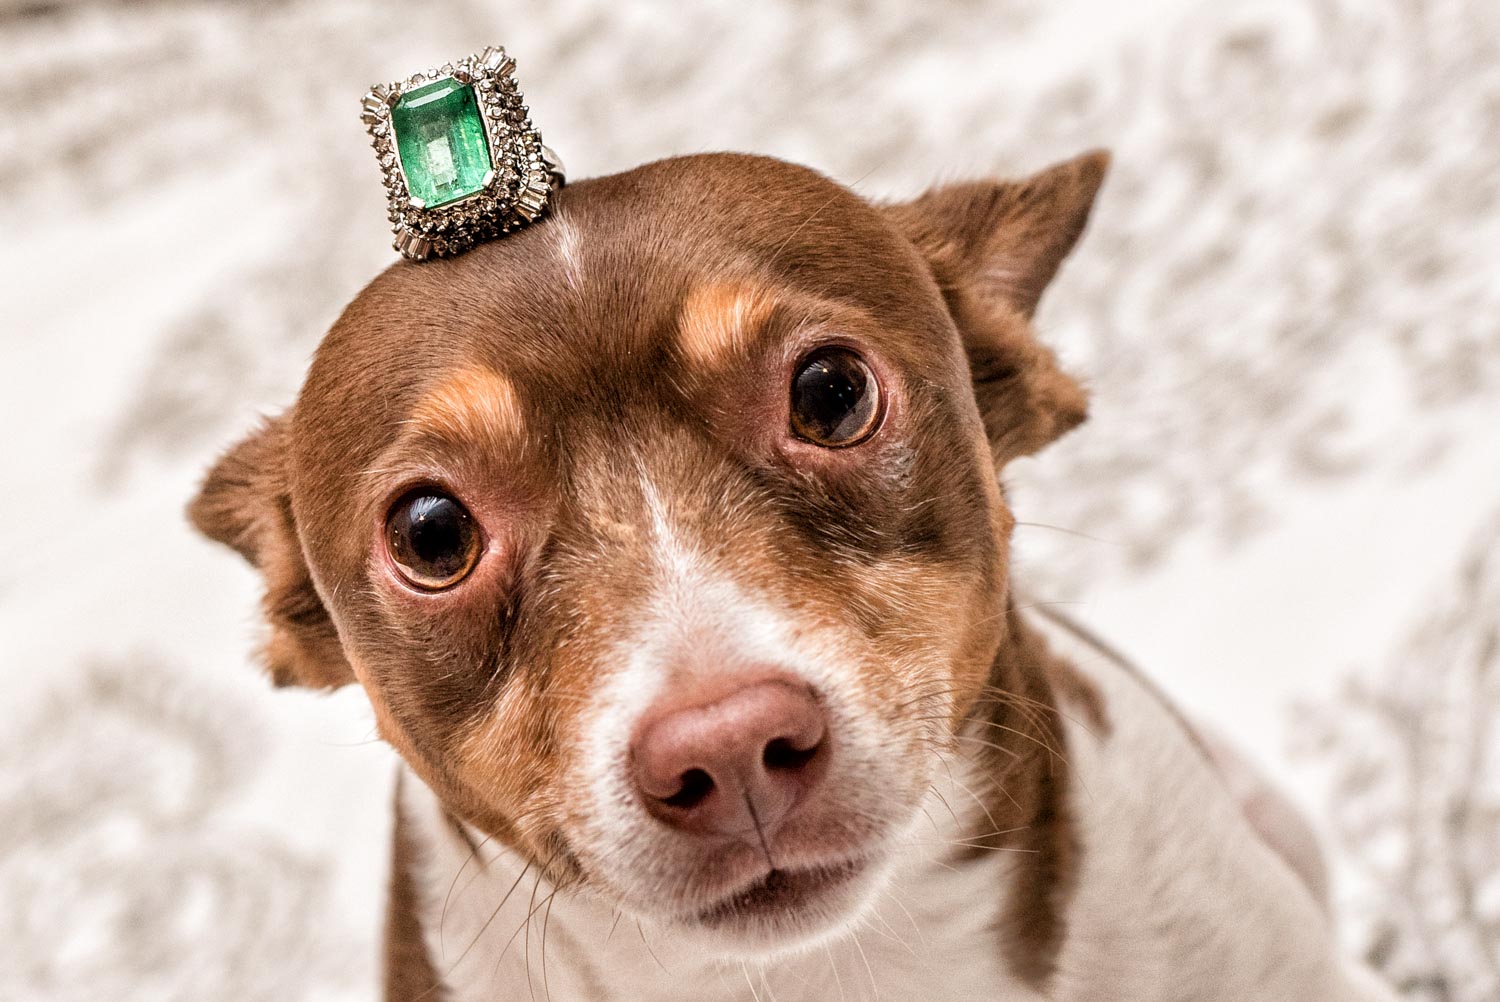 The Brides large emerald wedding ring sitting on top of a dogs head. The ring is so big it could almost be a little hat for the dog.